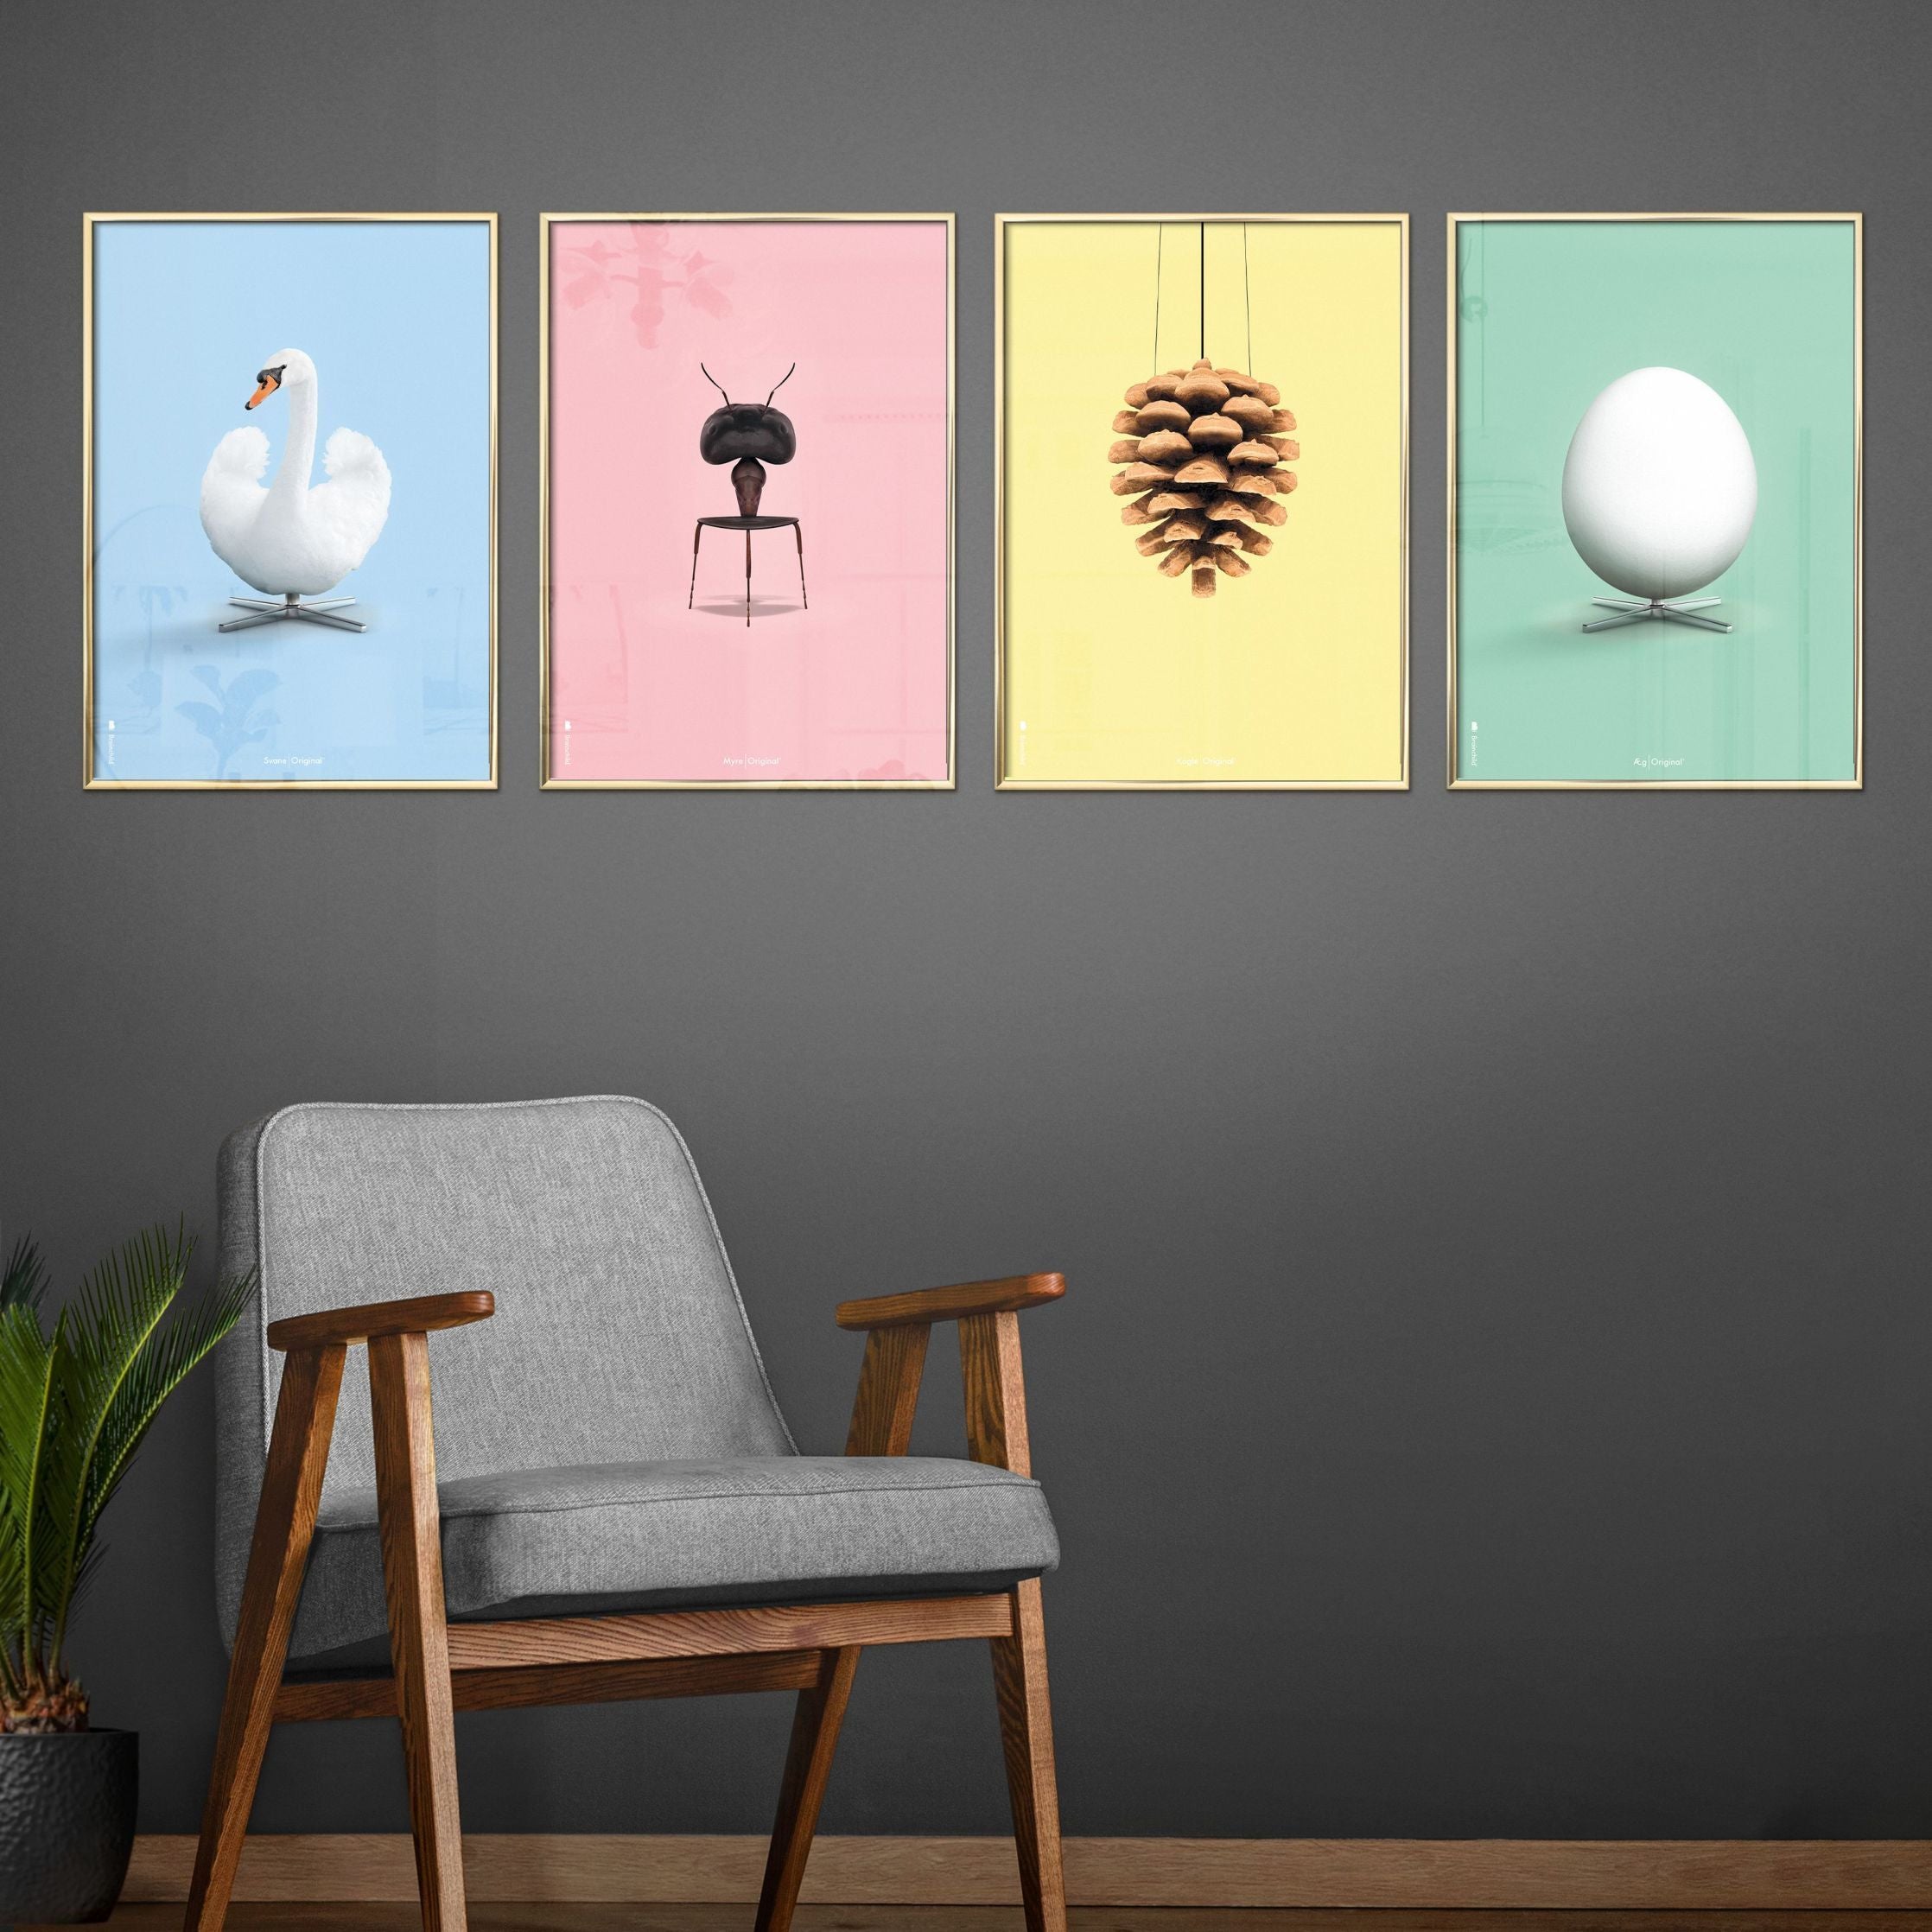 Brainchild Swan Classic Poster, Frame In Black Lacquered Wood 70 X100 Cm, Light Blue Background